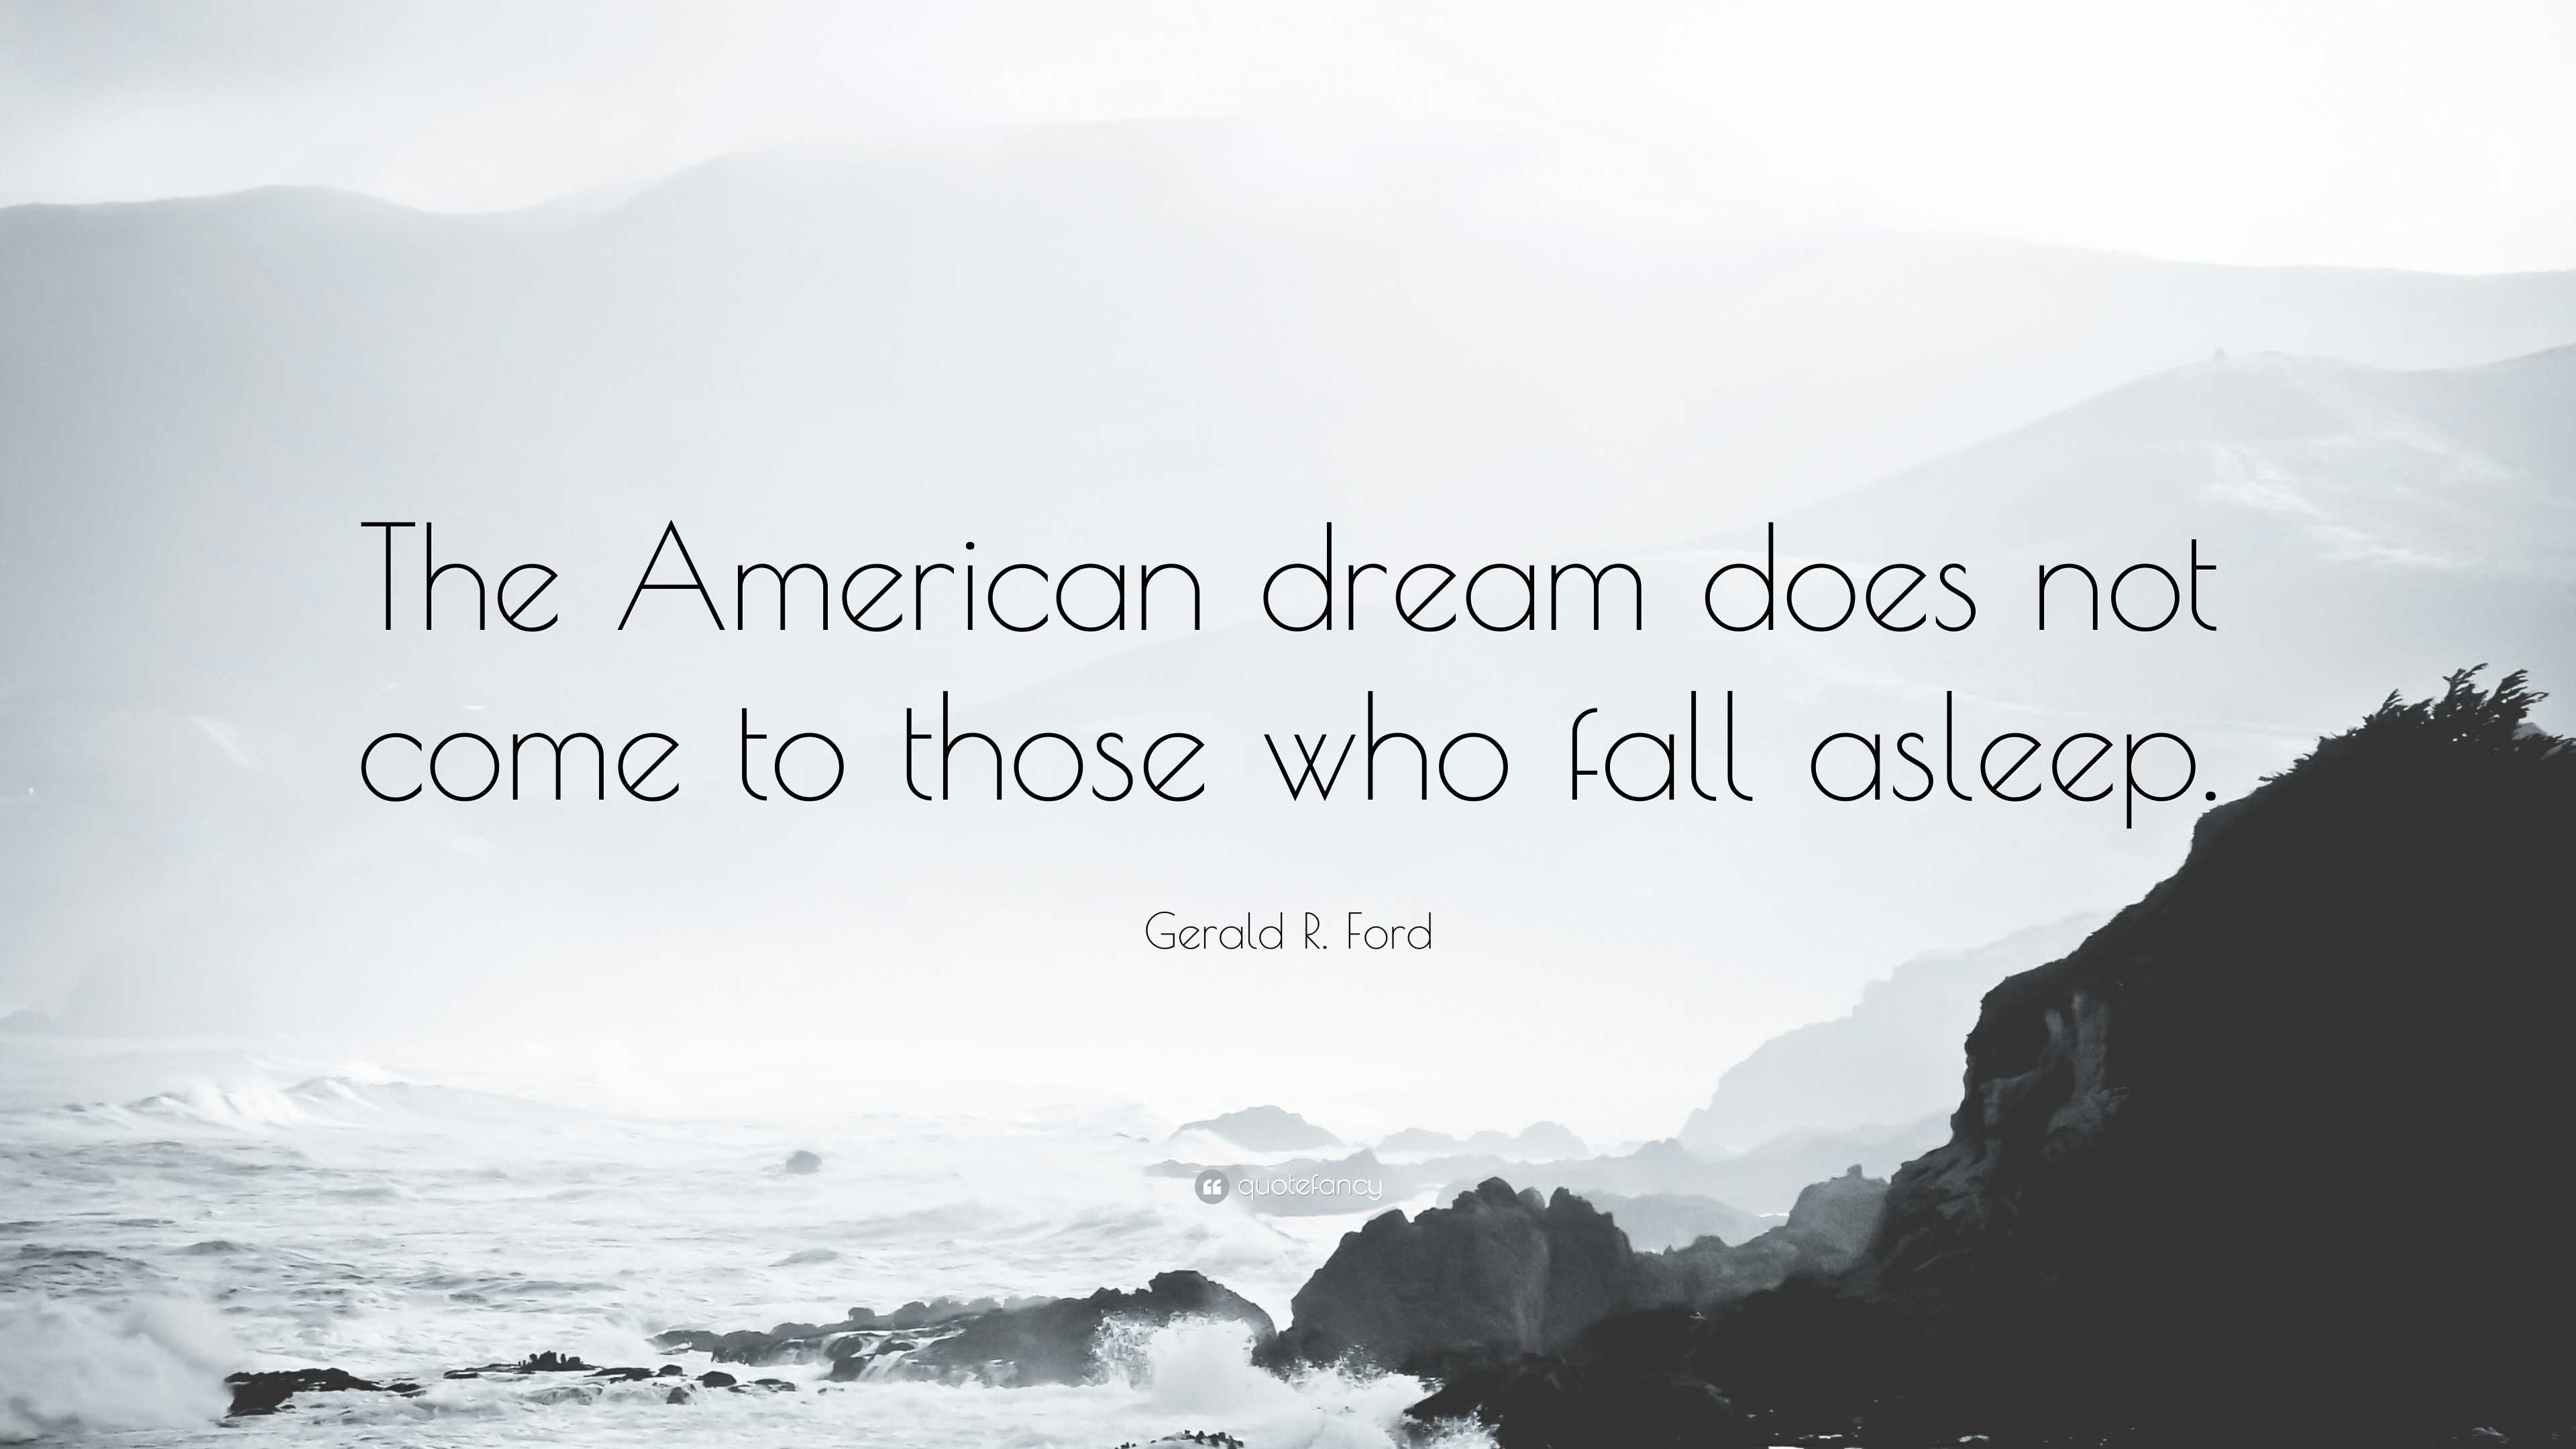 Gerald R. Ford Quote: “The American dream does not come to those who